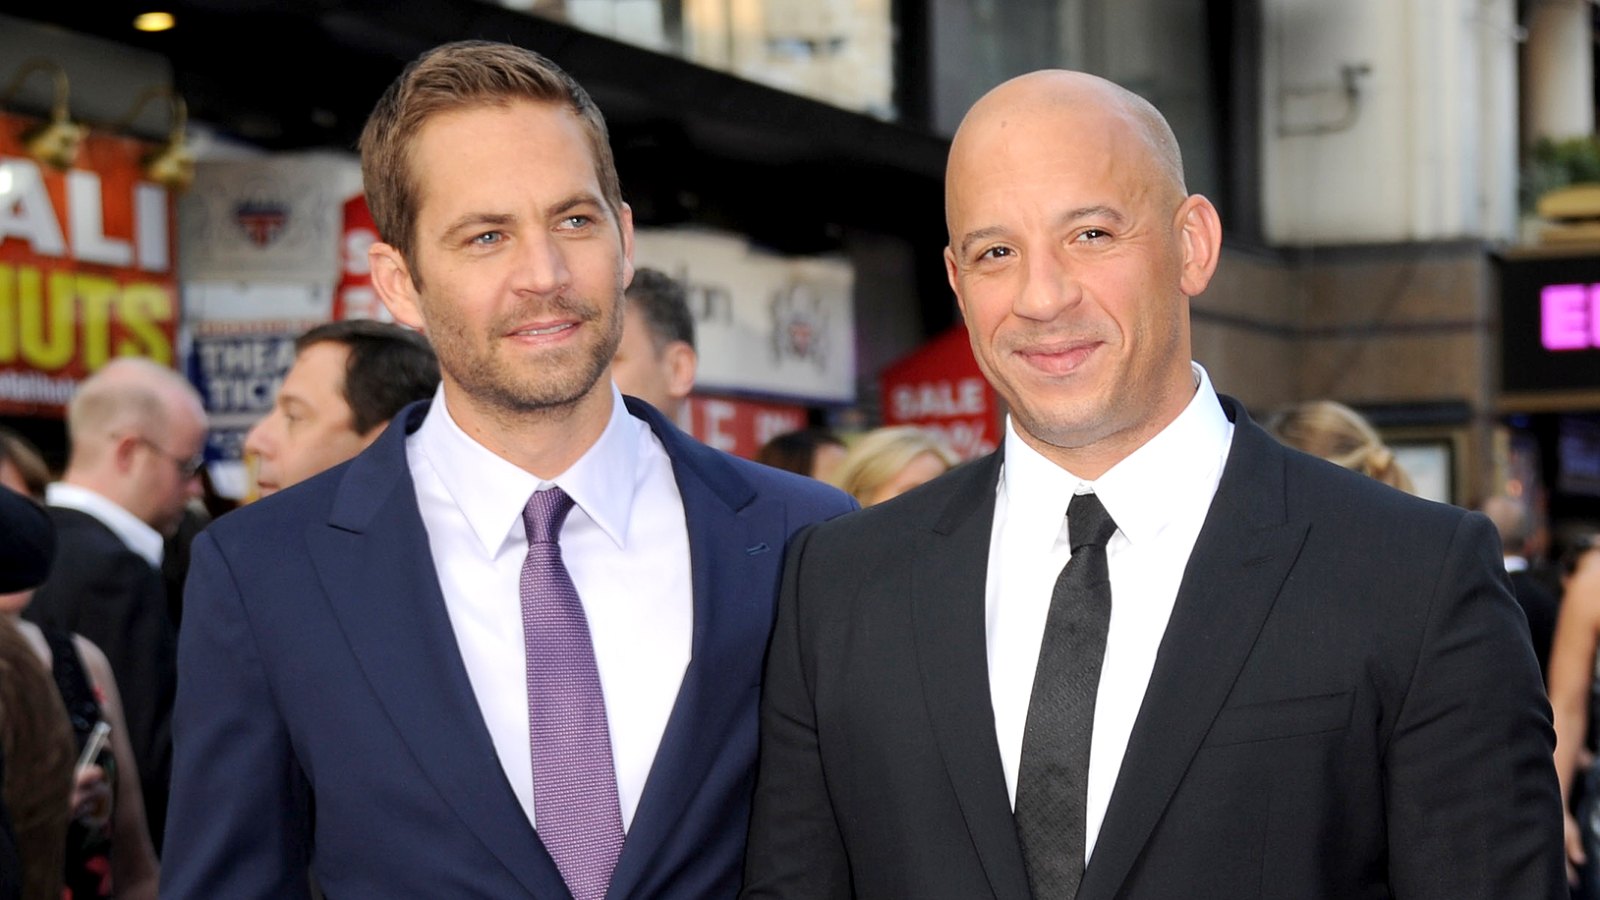 Paul Walker and Vin Diesel attend the "Fast & Furious 6" World Premiere at The Empire, Leicester Square on May 7, 2013 in London, England.